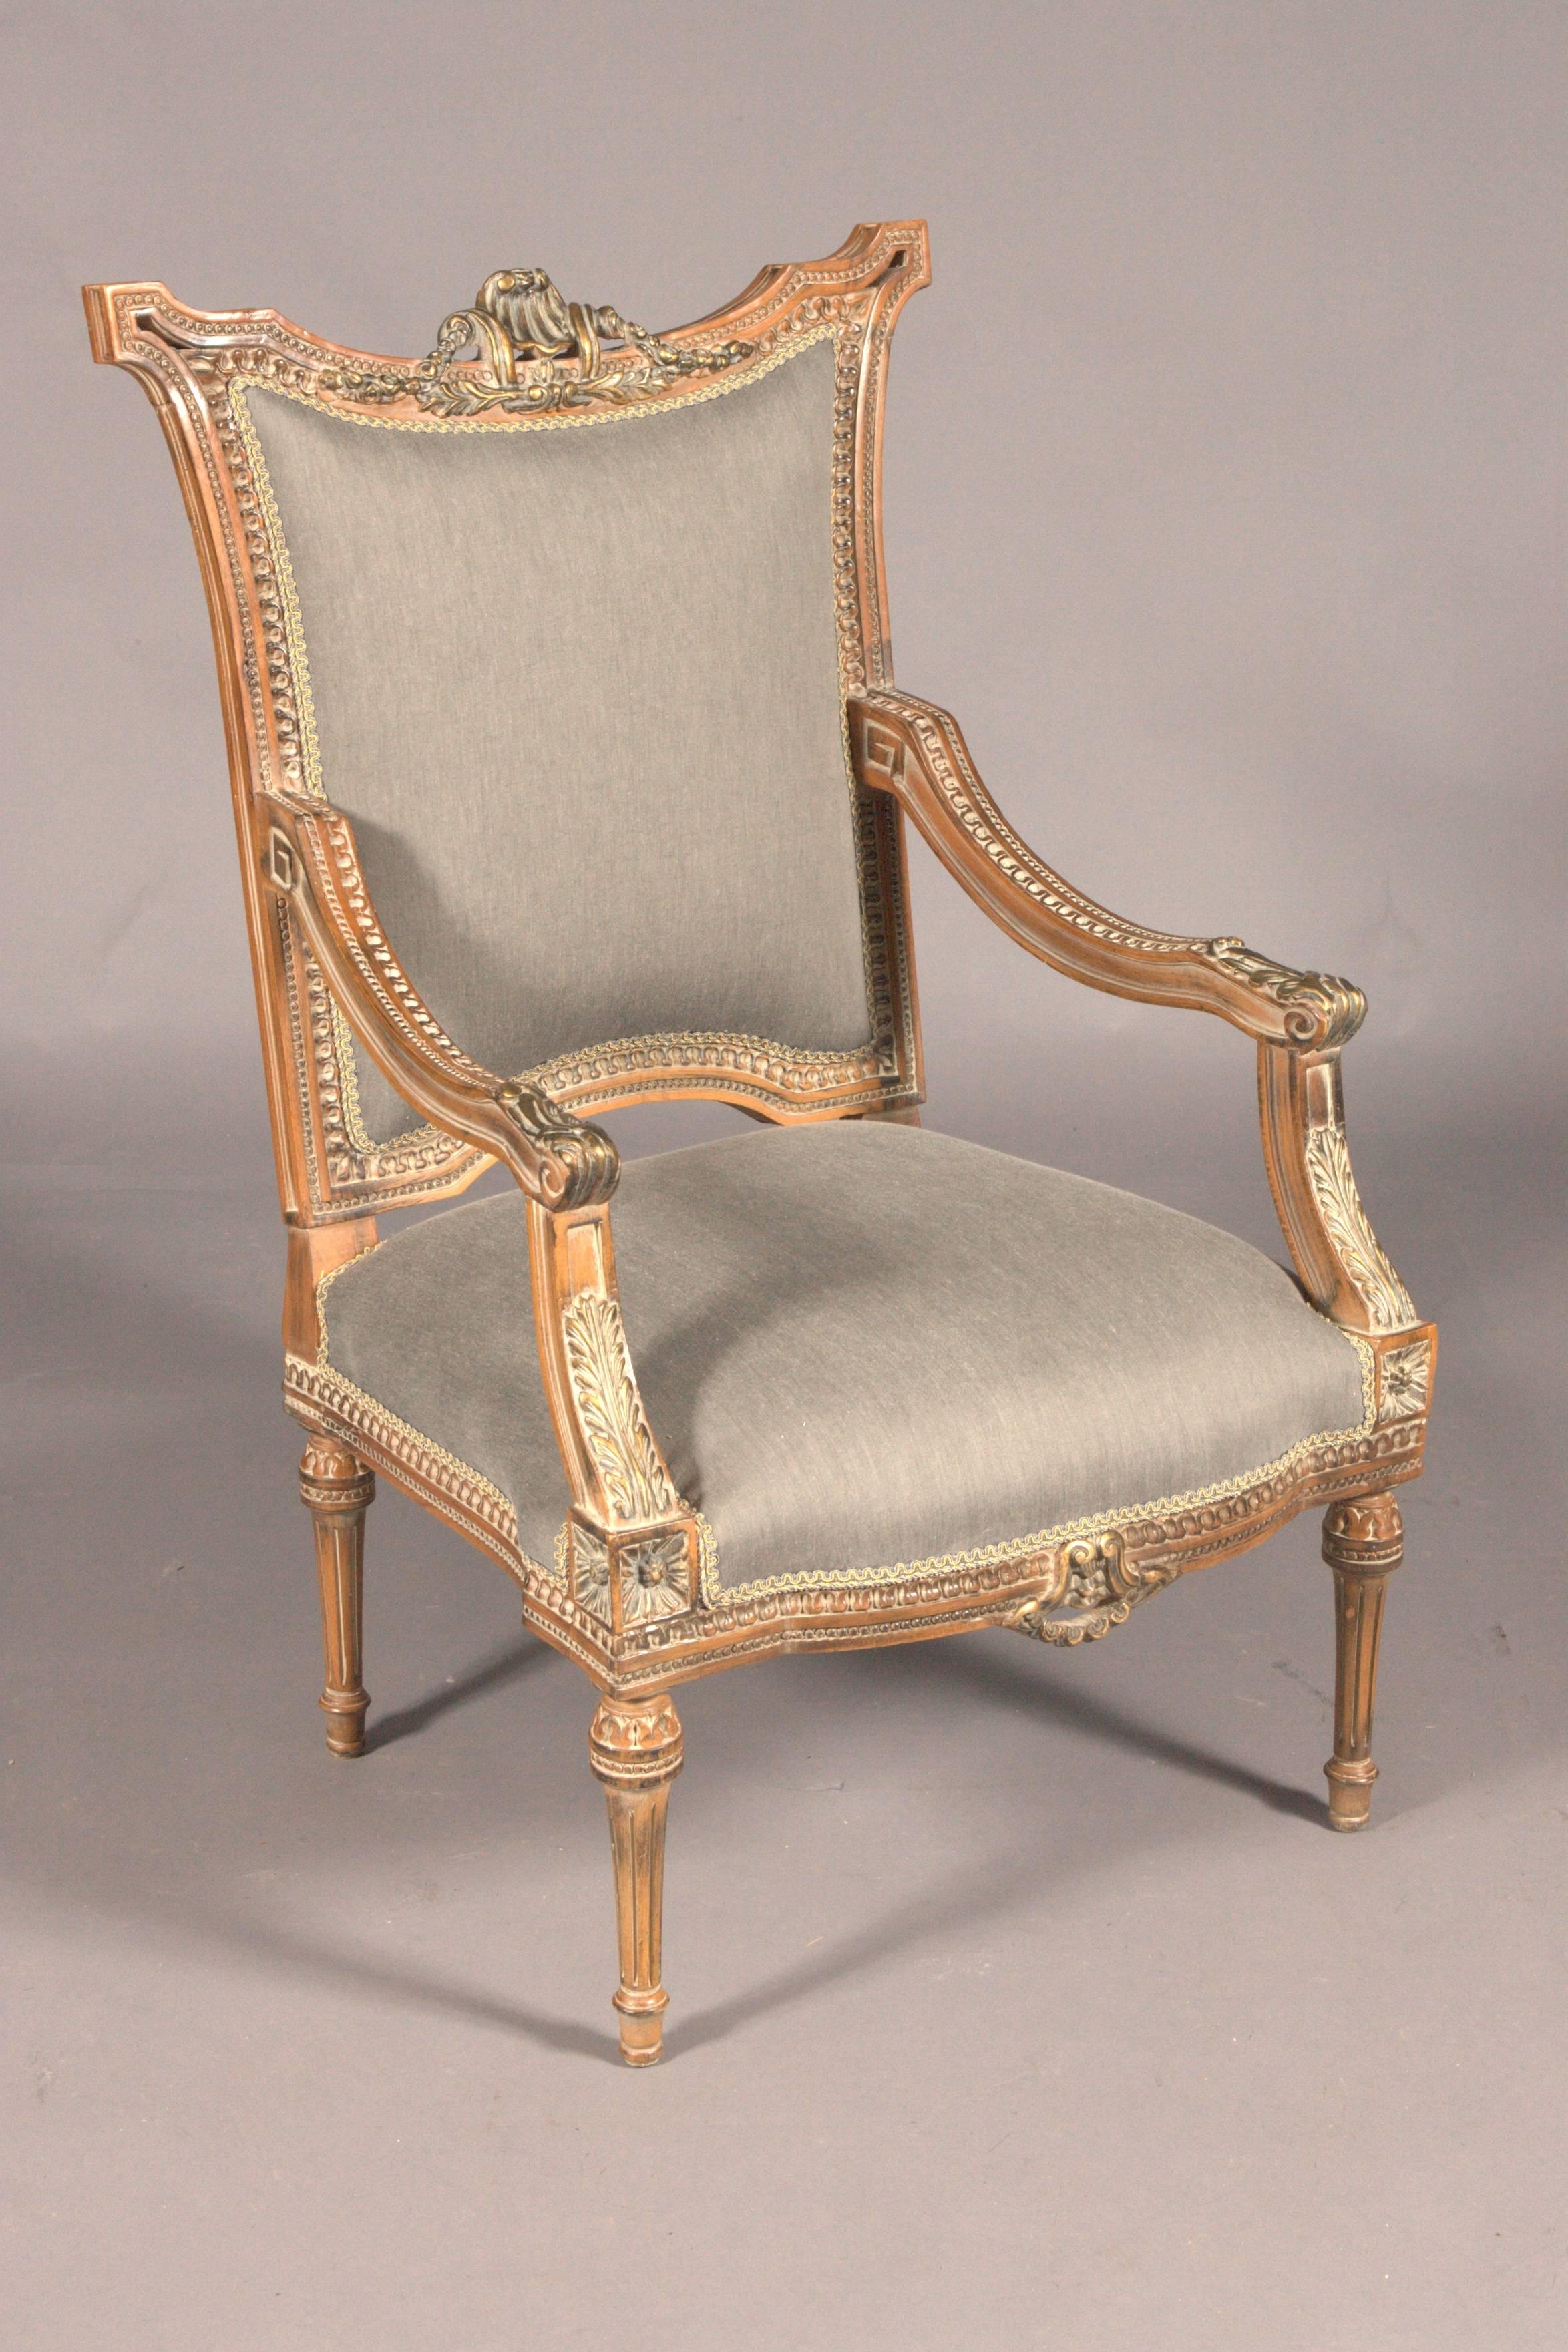 Louis XVI 20th Century French Seating Group in the Louis Seize Style Beechwood